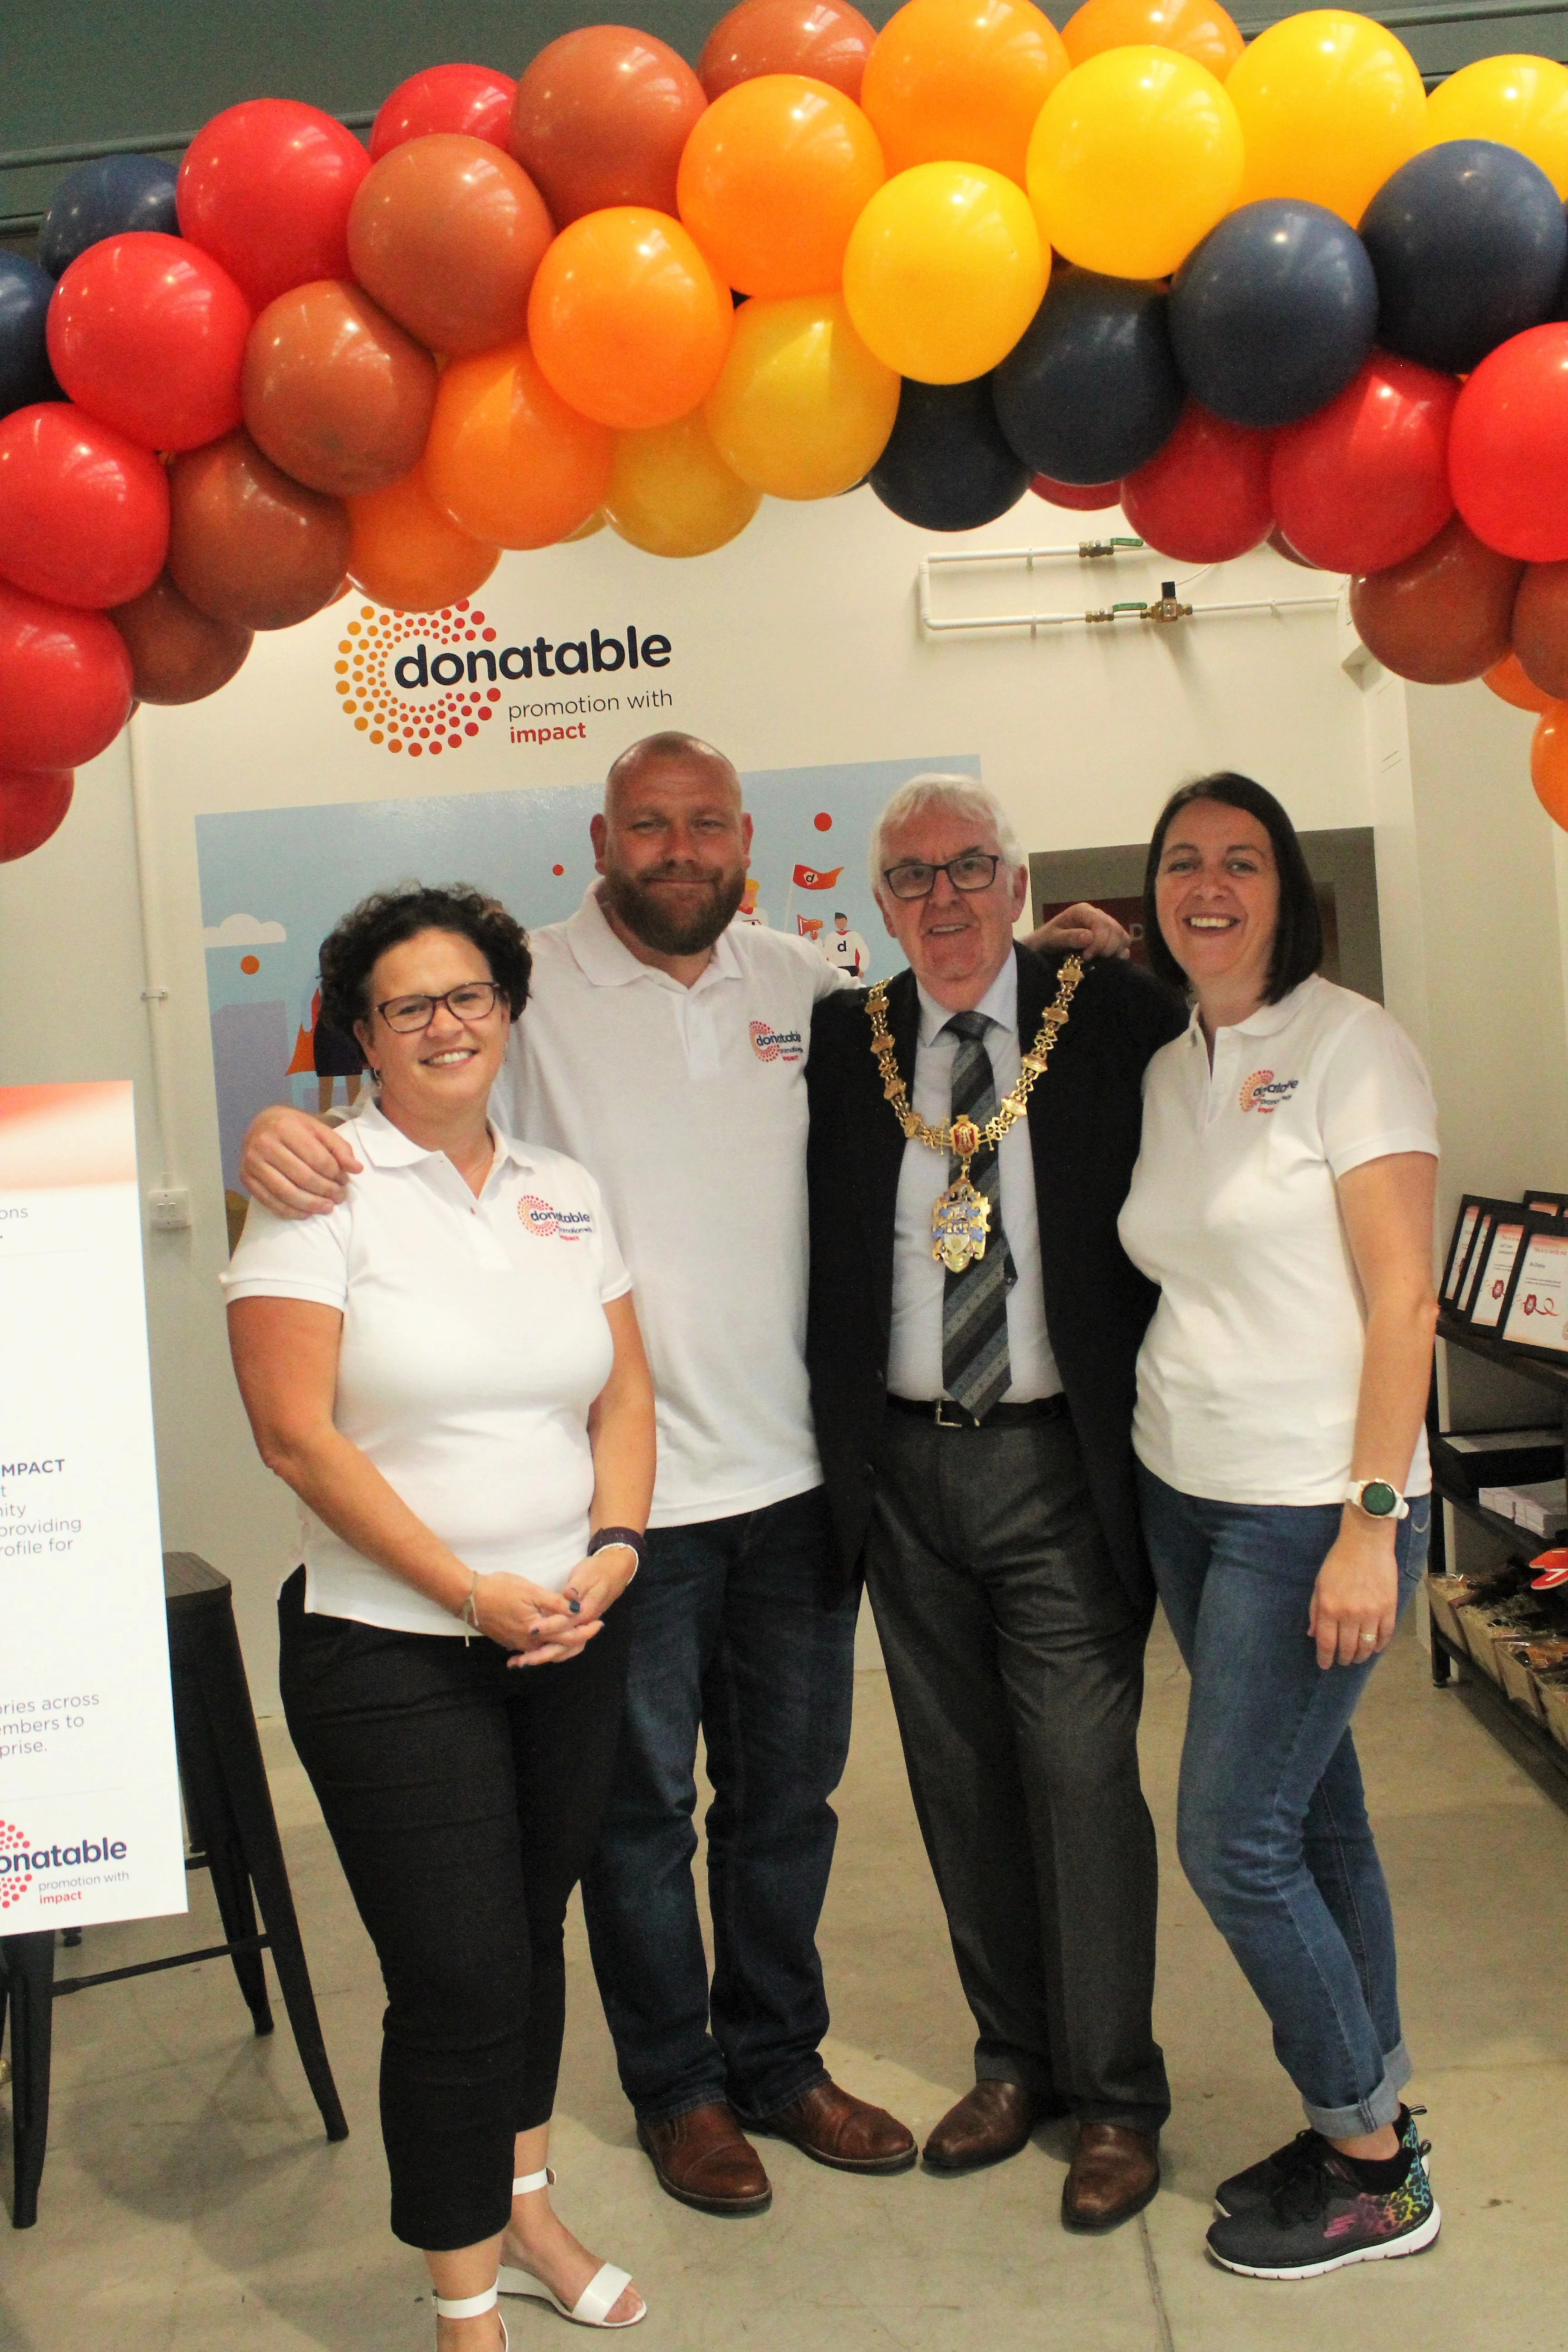 Donatable founders receive support of Cllr Tom Dunlop as they launches new Cheshire social enterprise